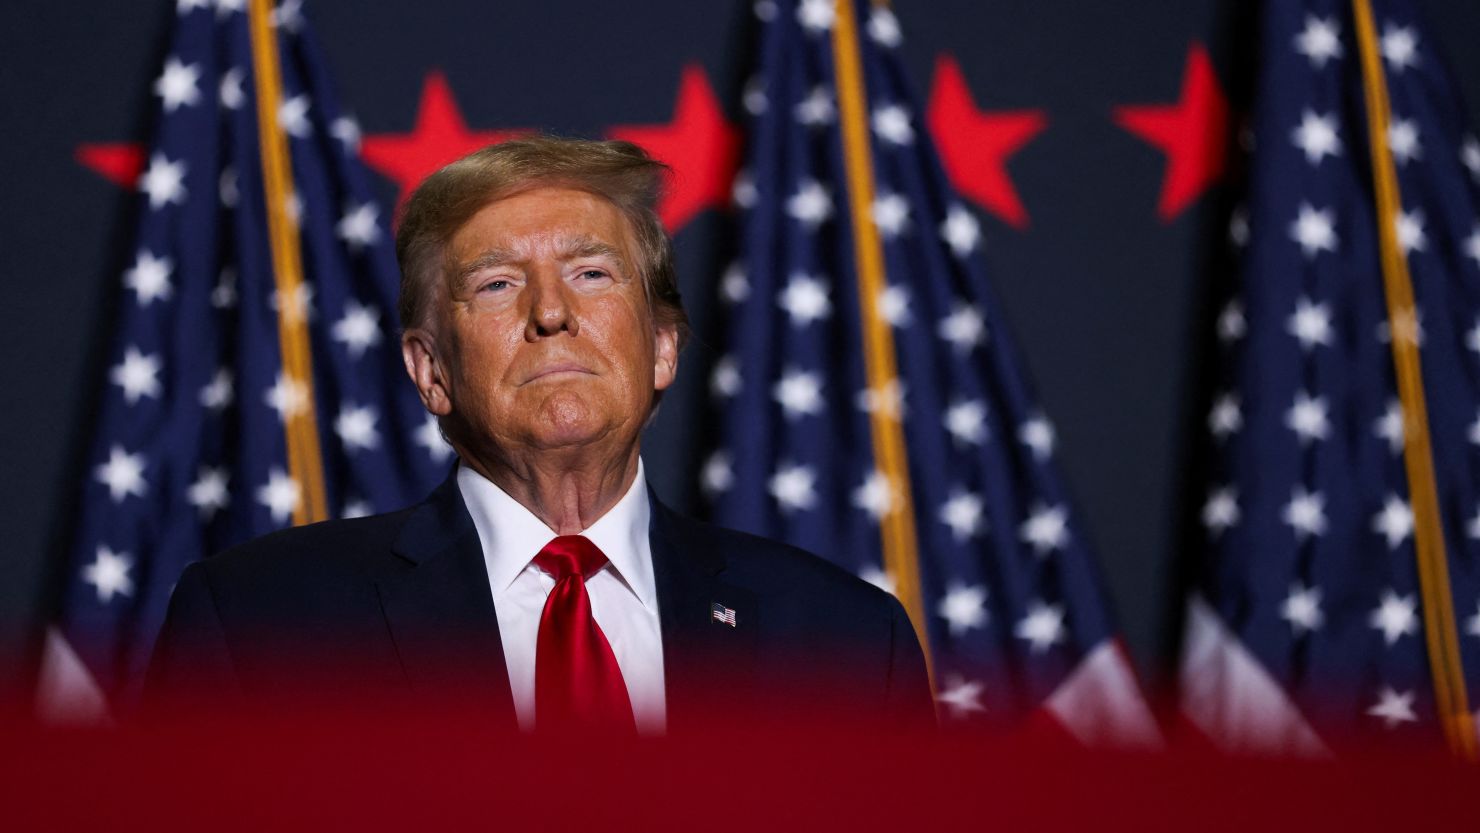 Republican presidential candidate and former President Donald Trump attends a campaign event ahead of the Republican presidential primary election in North Charleston, South Carolina, February 14, 2024.